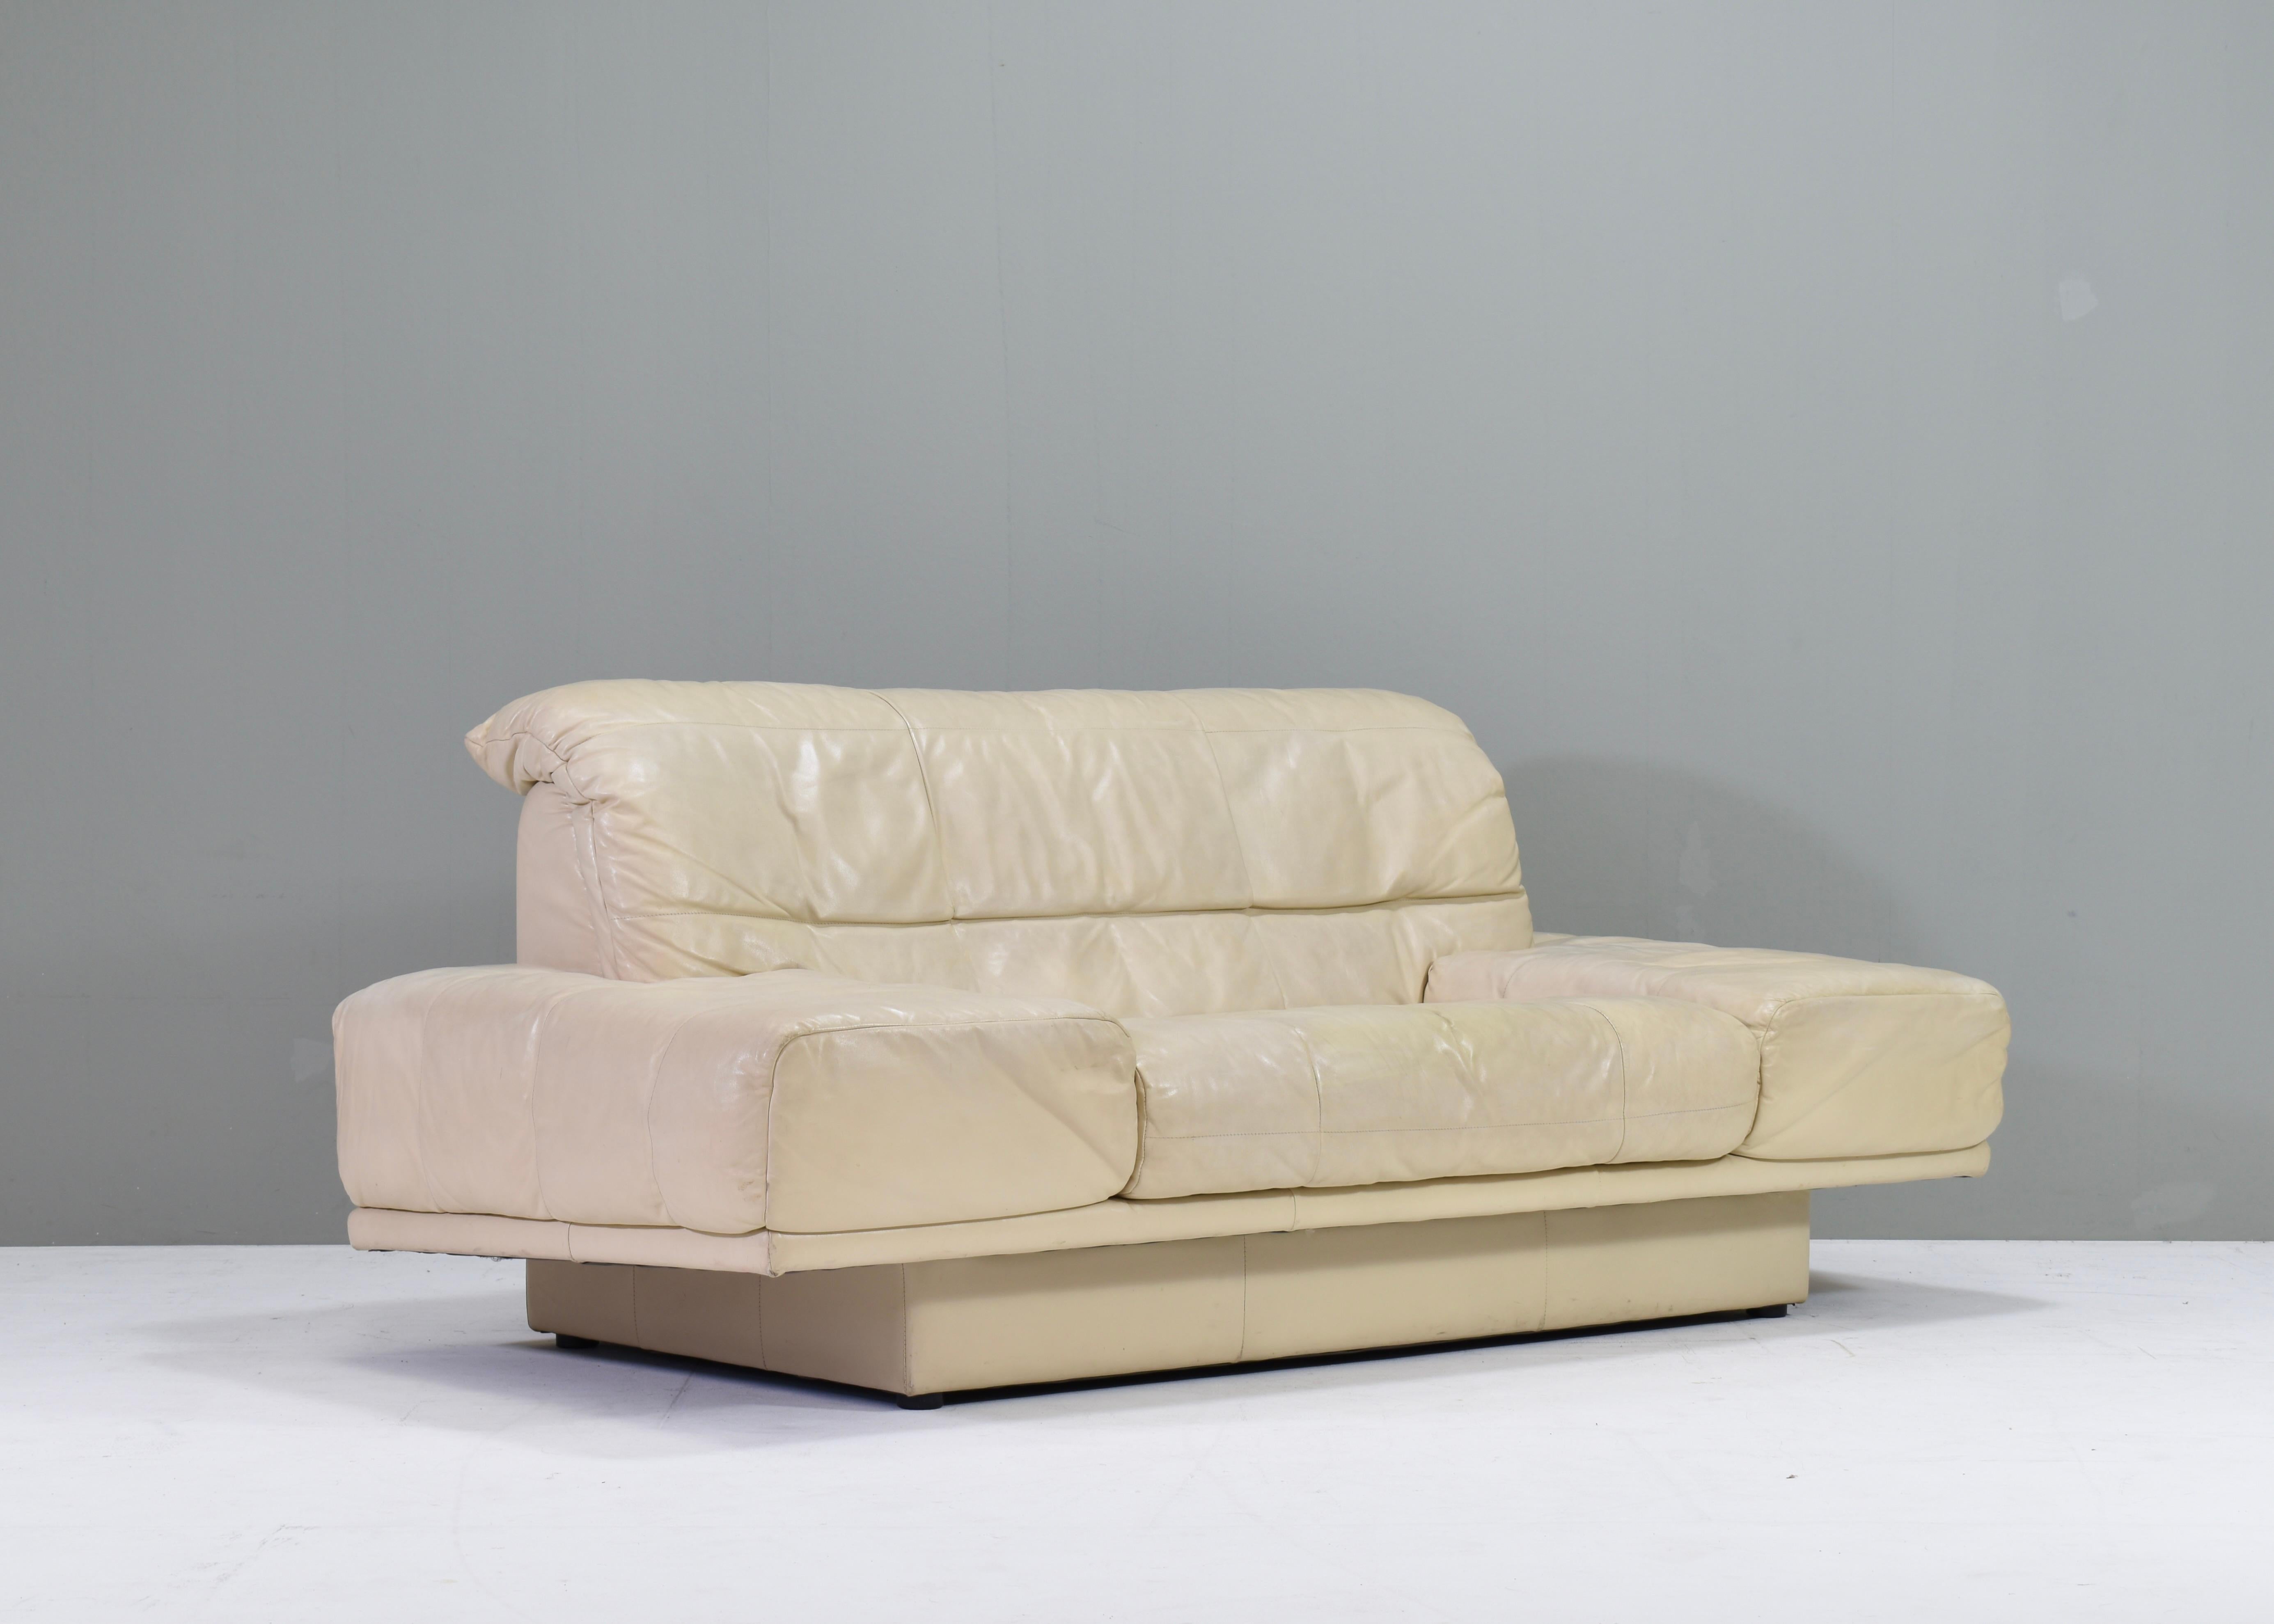 Mid-Century Modern Rolf Benz 2-seat sofa in Ivory Cream White Leather – Germany, circa 1980-1990 For Sale